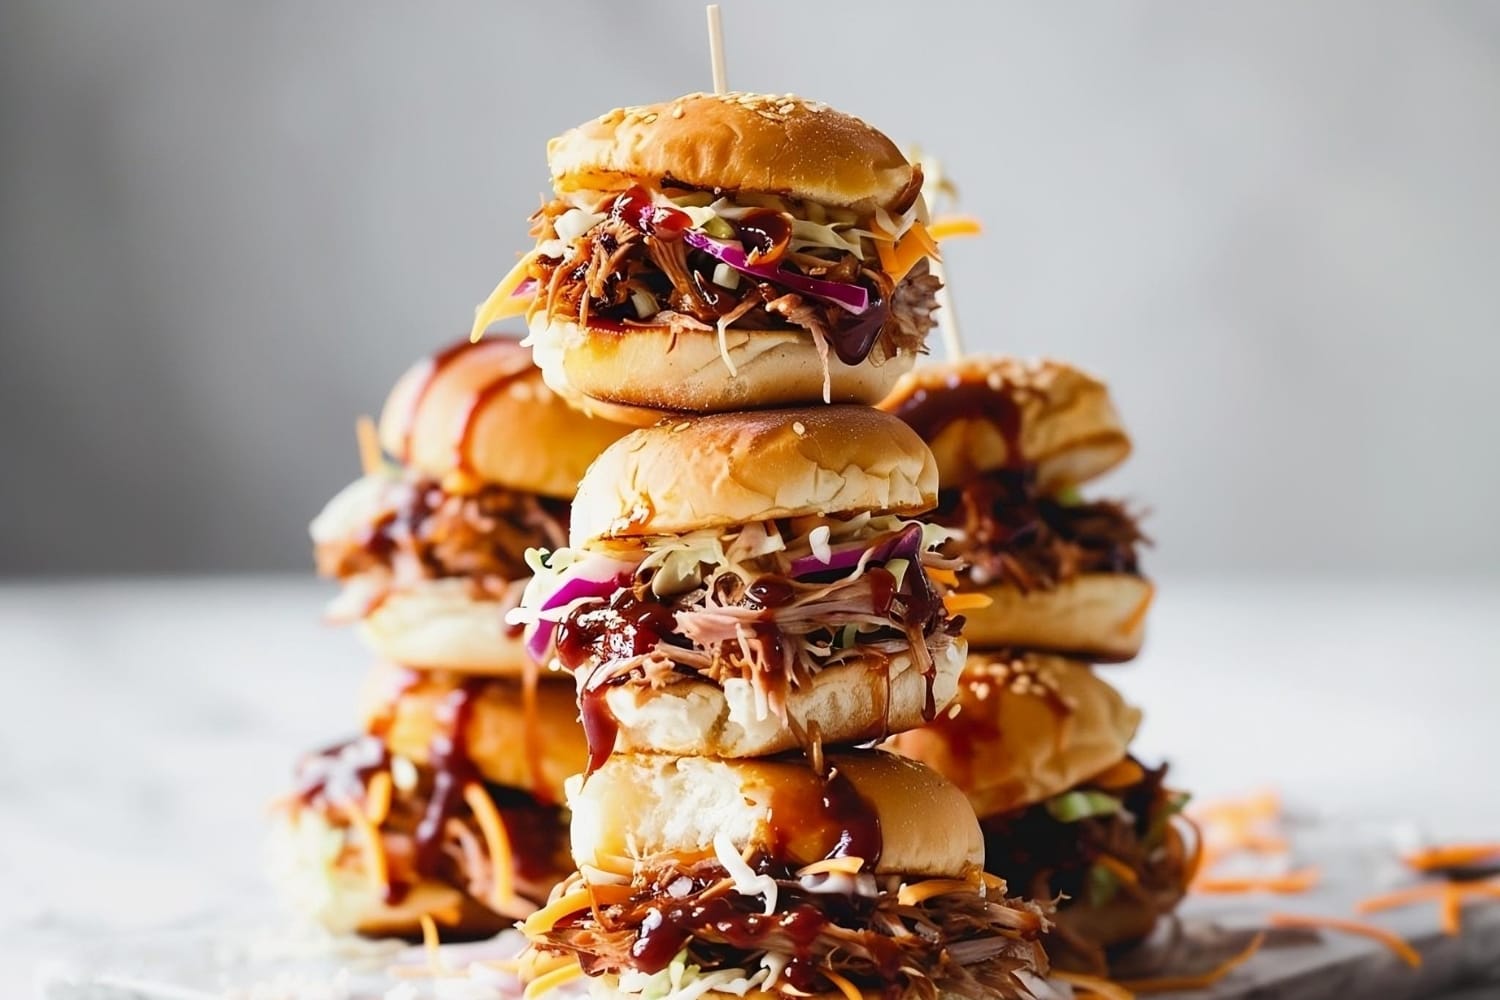 Savory homemade pulled pork sliders with coleslaw and bbq sauce